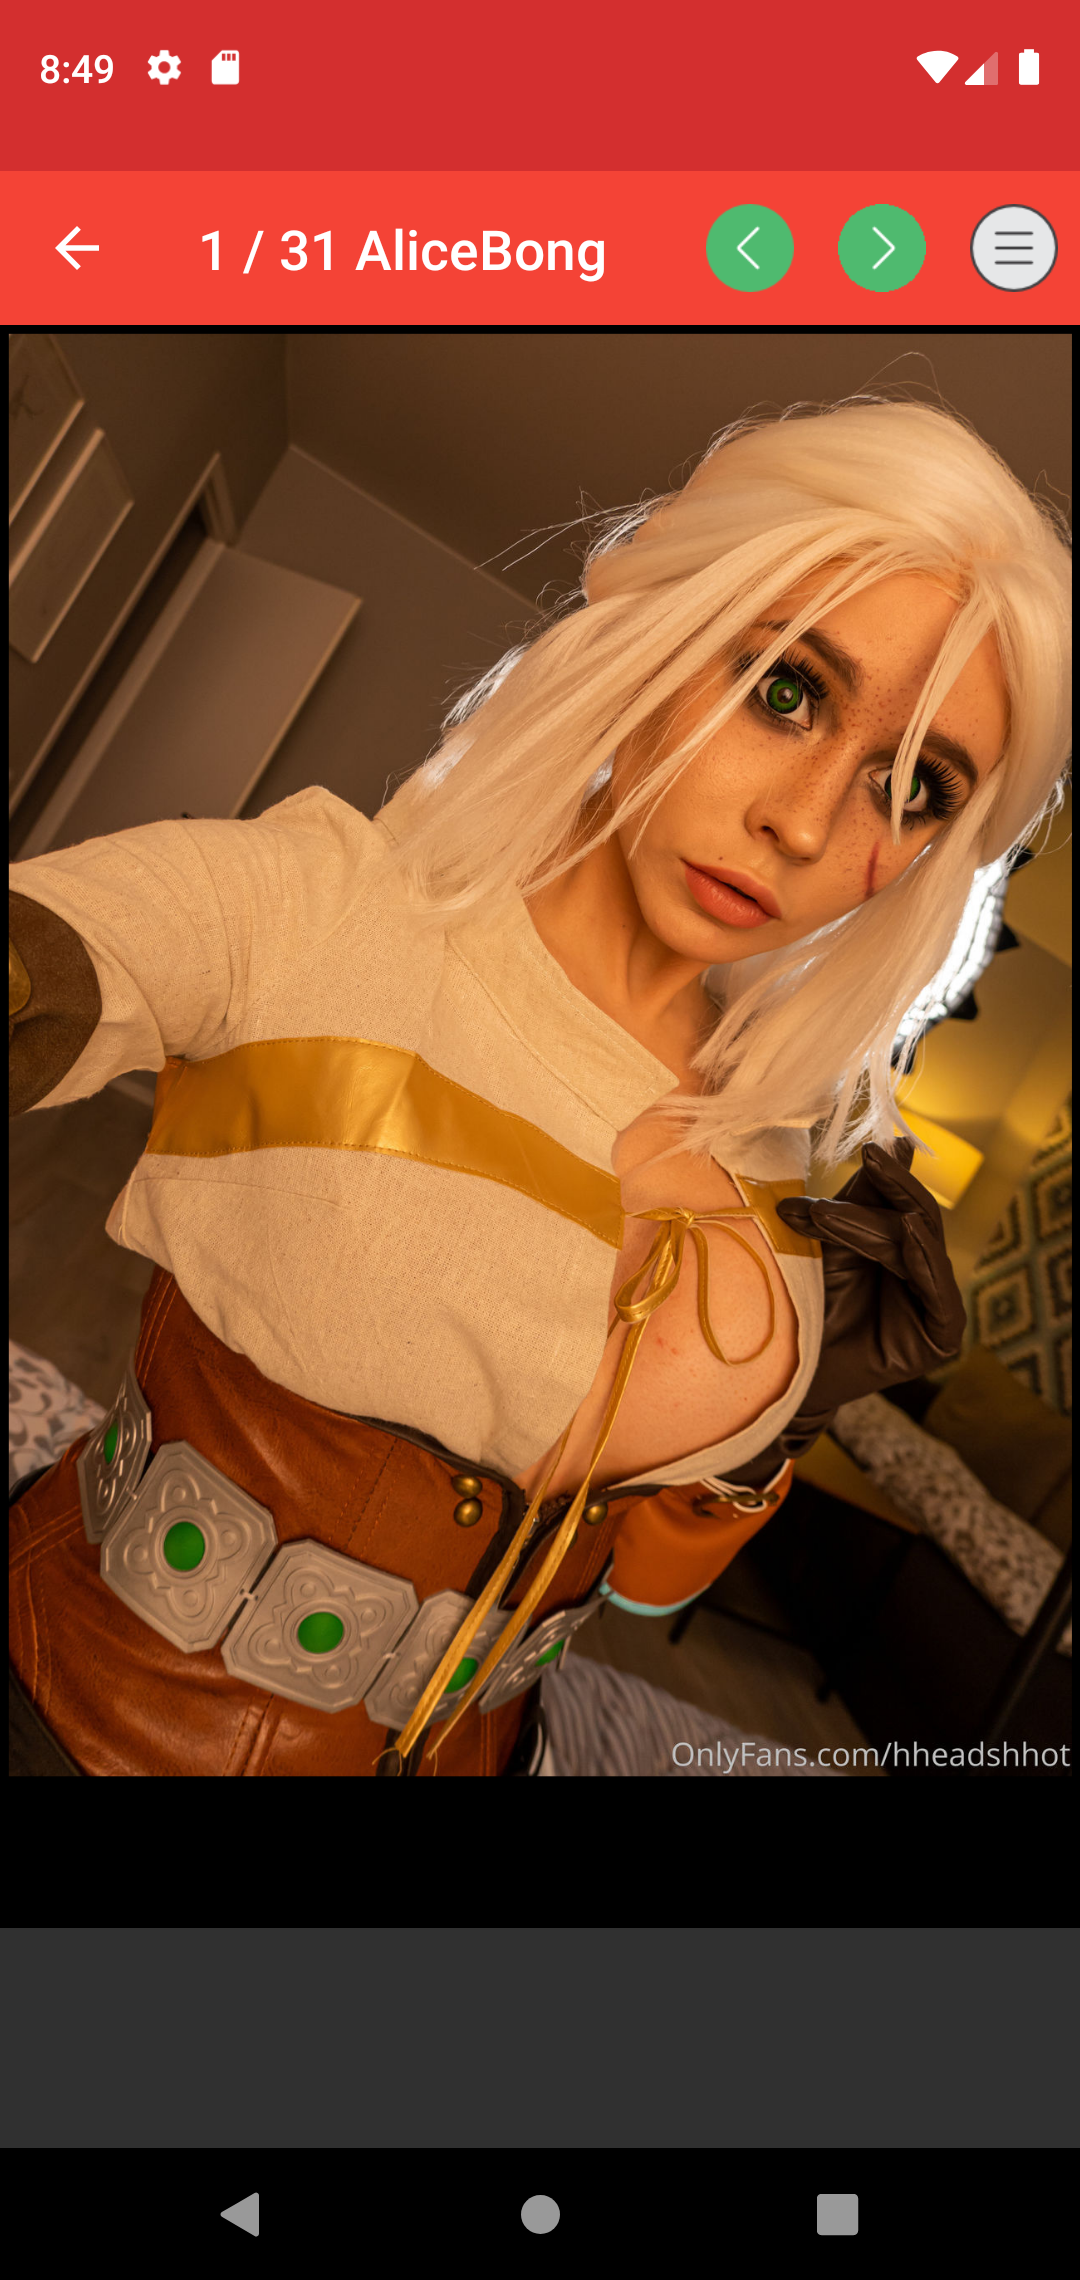 Witcher Cosplays hentai,hantai,apps,porn,picd,picture,bisexpics,app,star,hentia,picw,witcher,download,ebony,comics,pics,hot,anime,cosplay,erotic,sexy